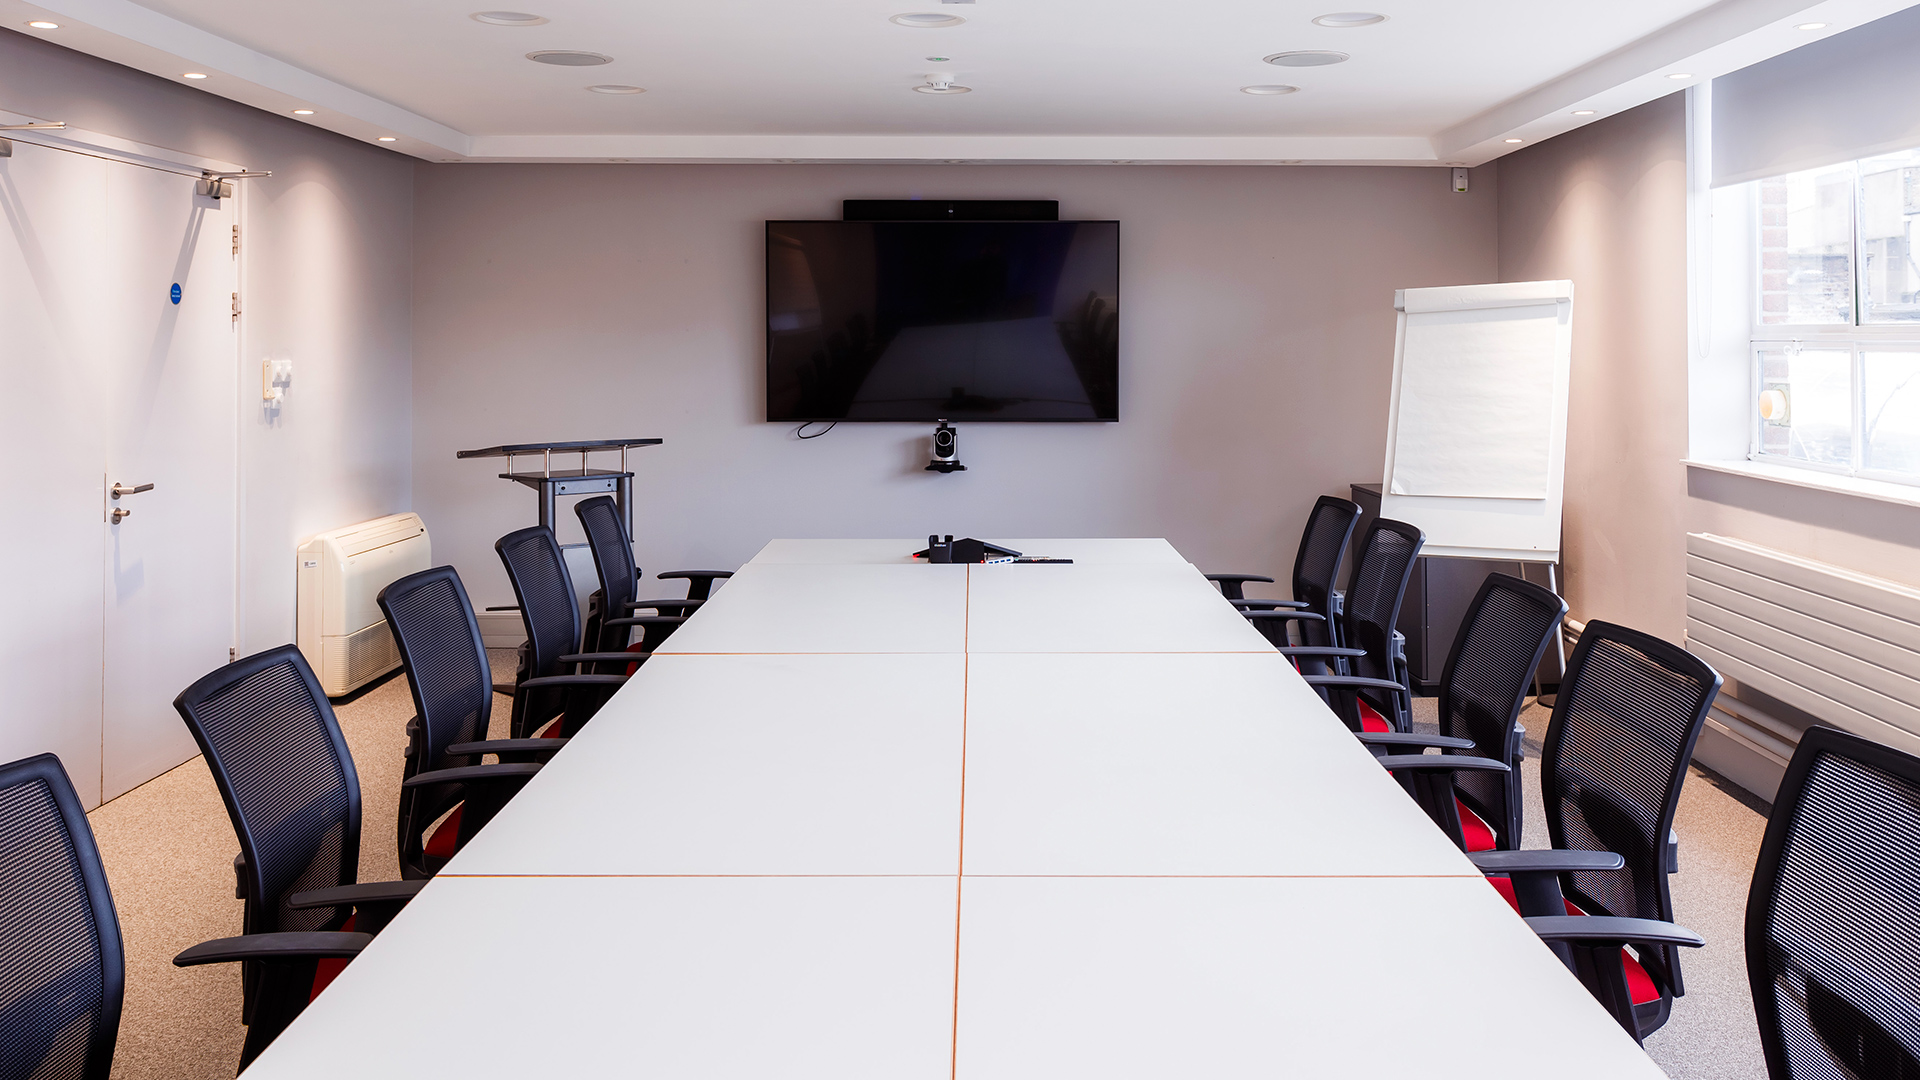 A long conference table surrounded by chairs in the large Digital Depot presentation room